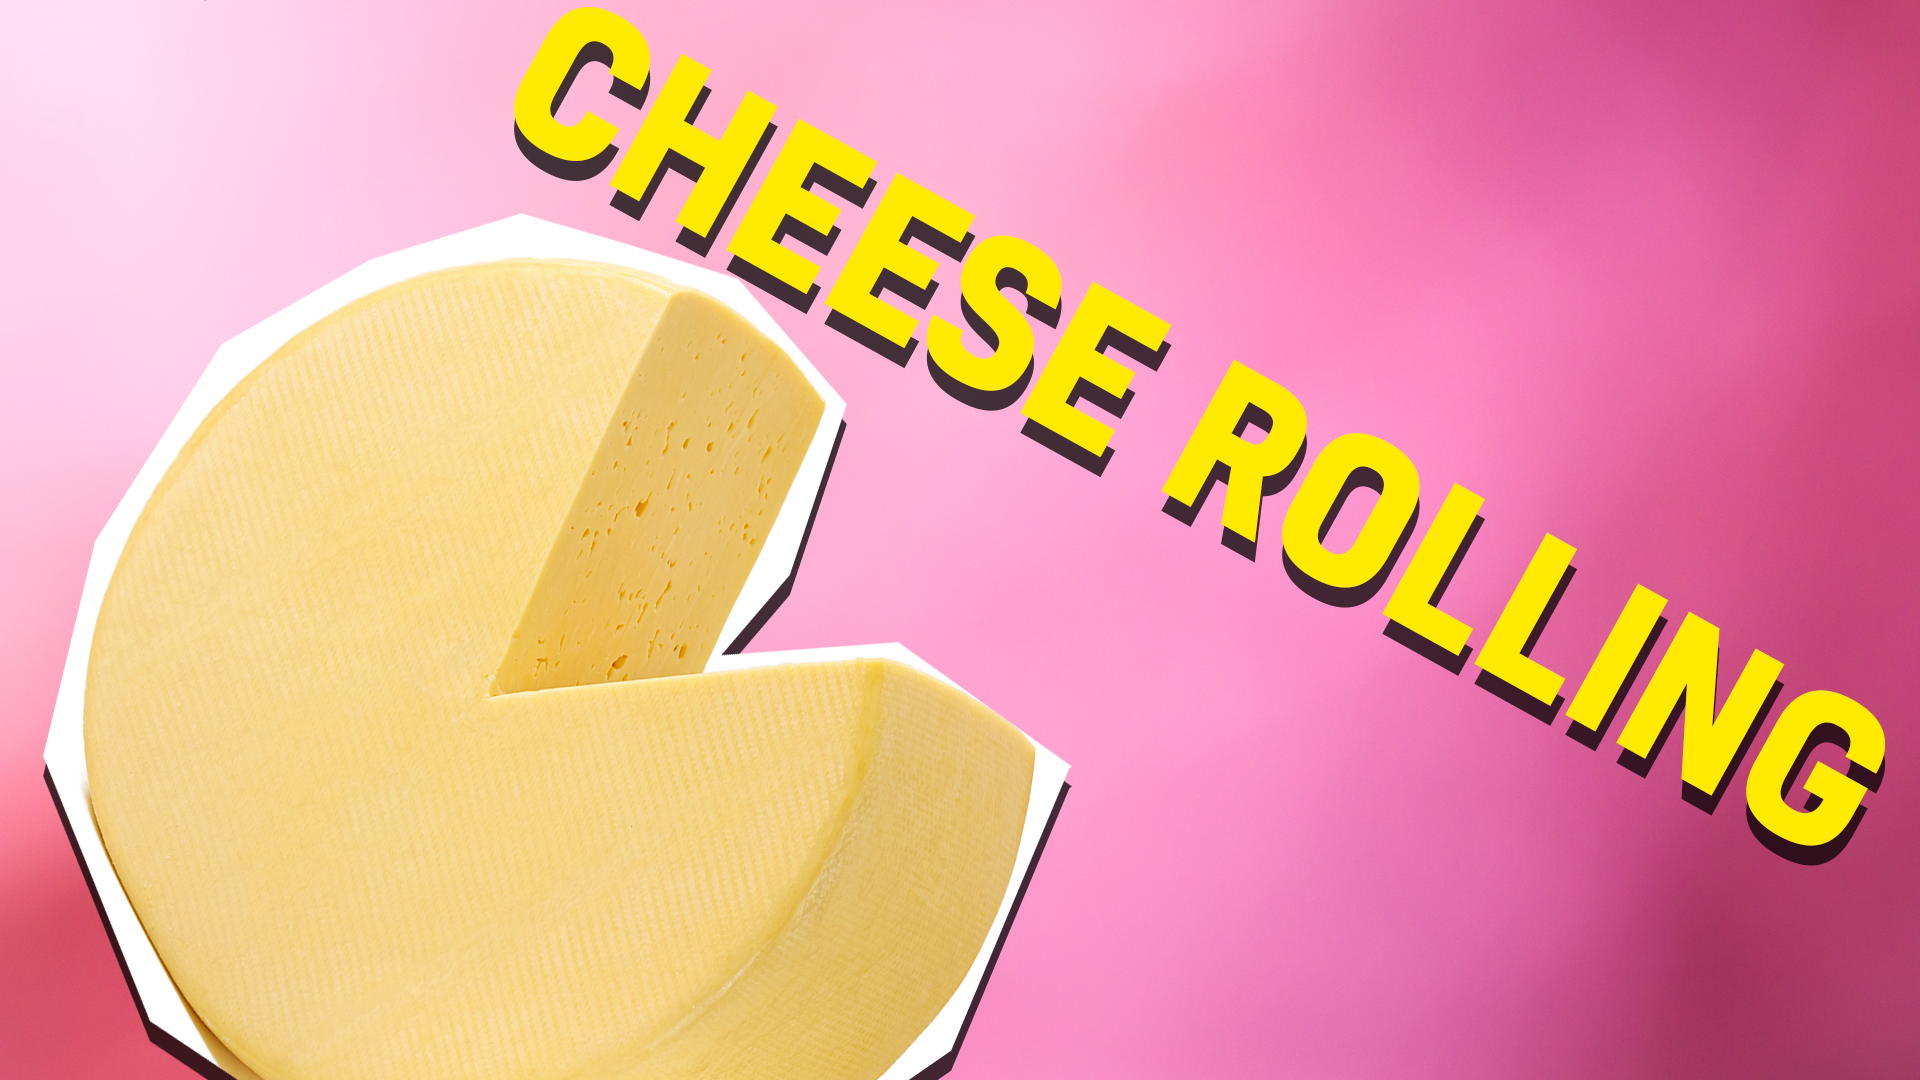 Cheese with the words cheese rolling on a pink background